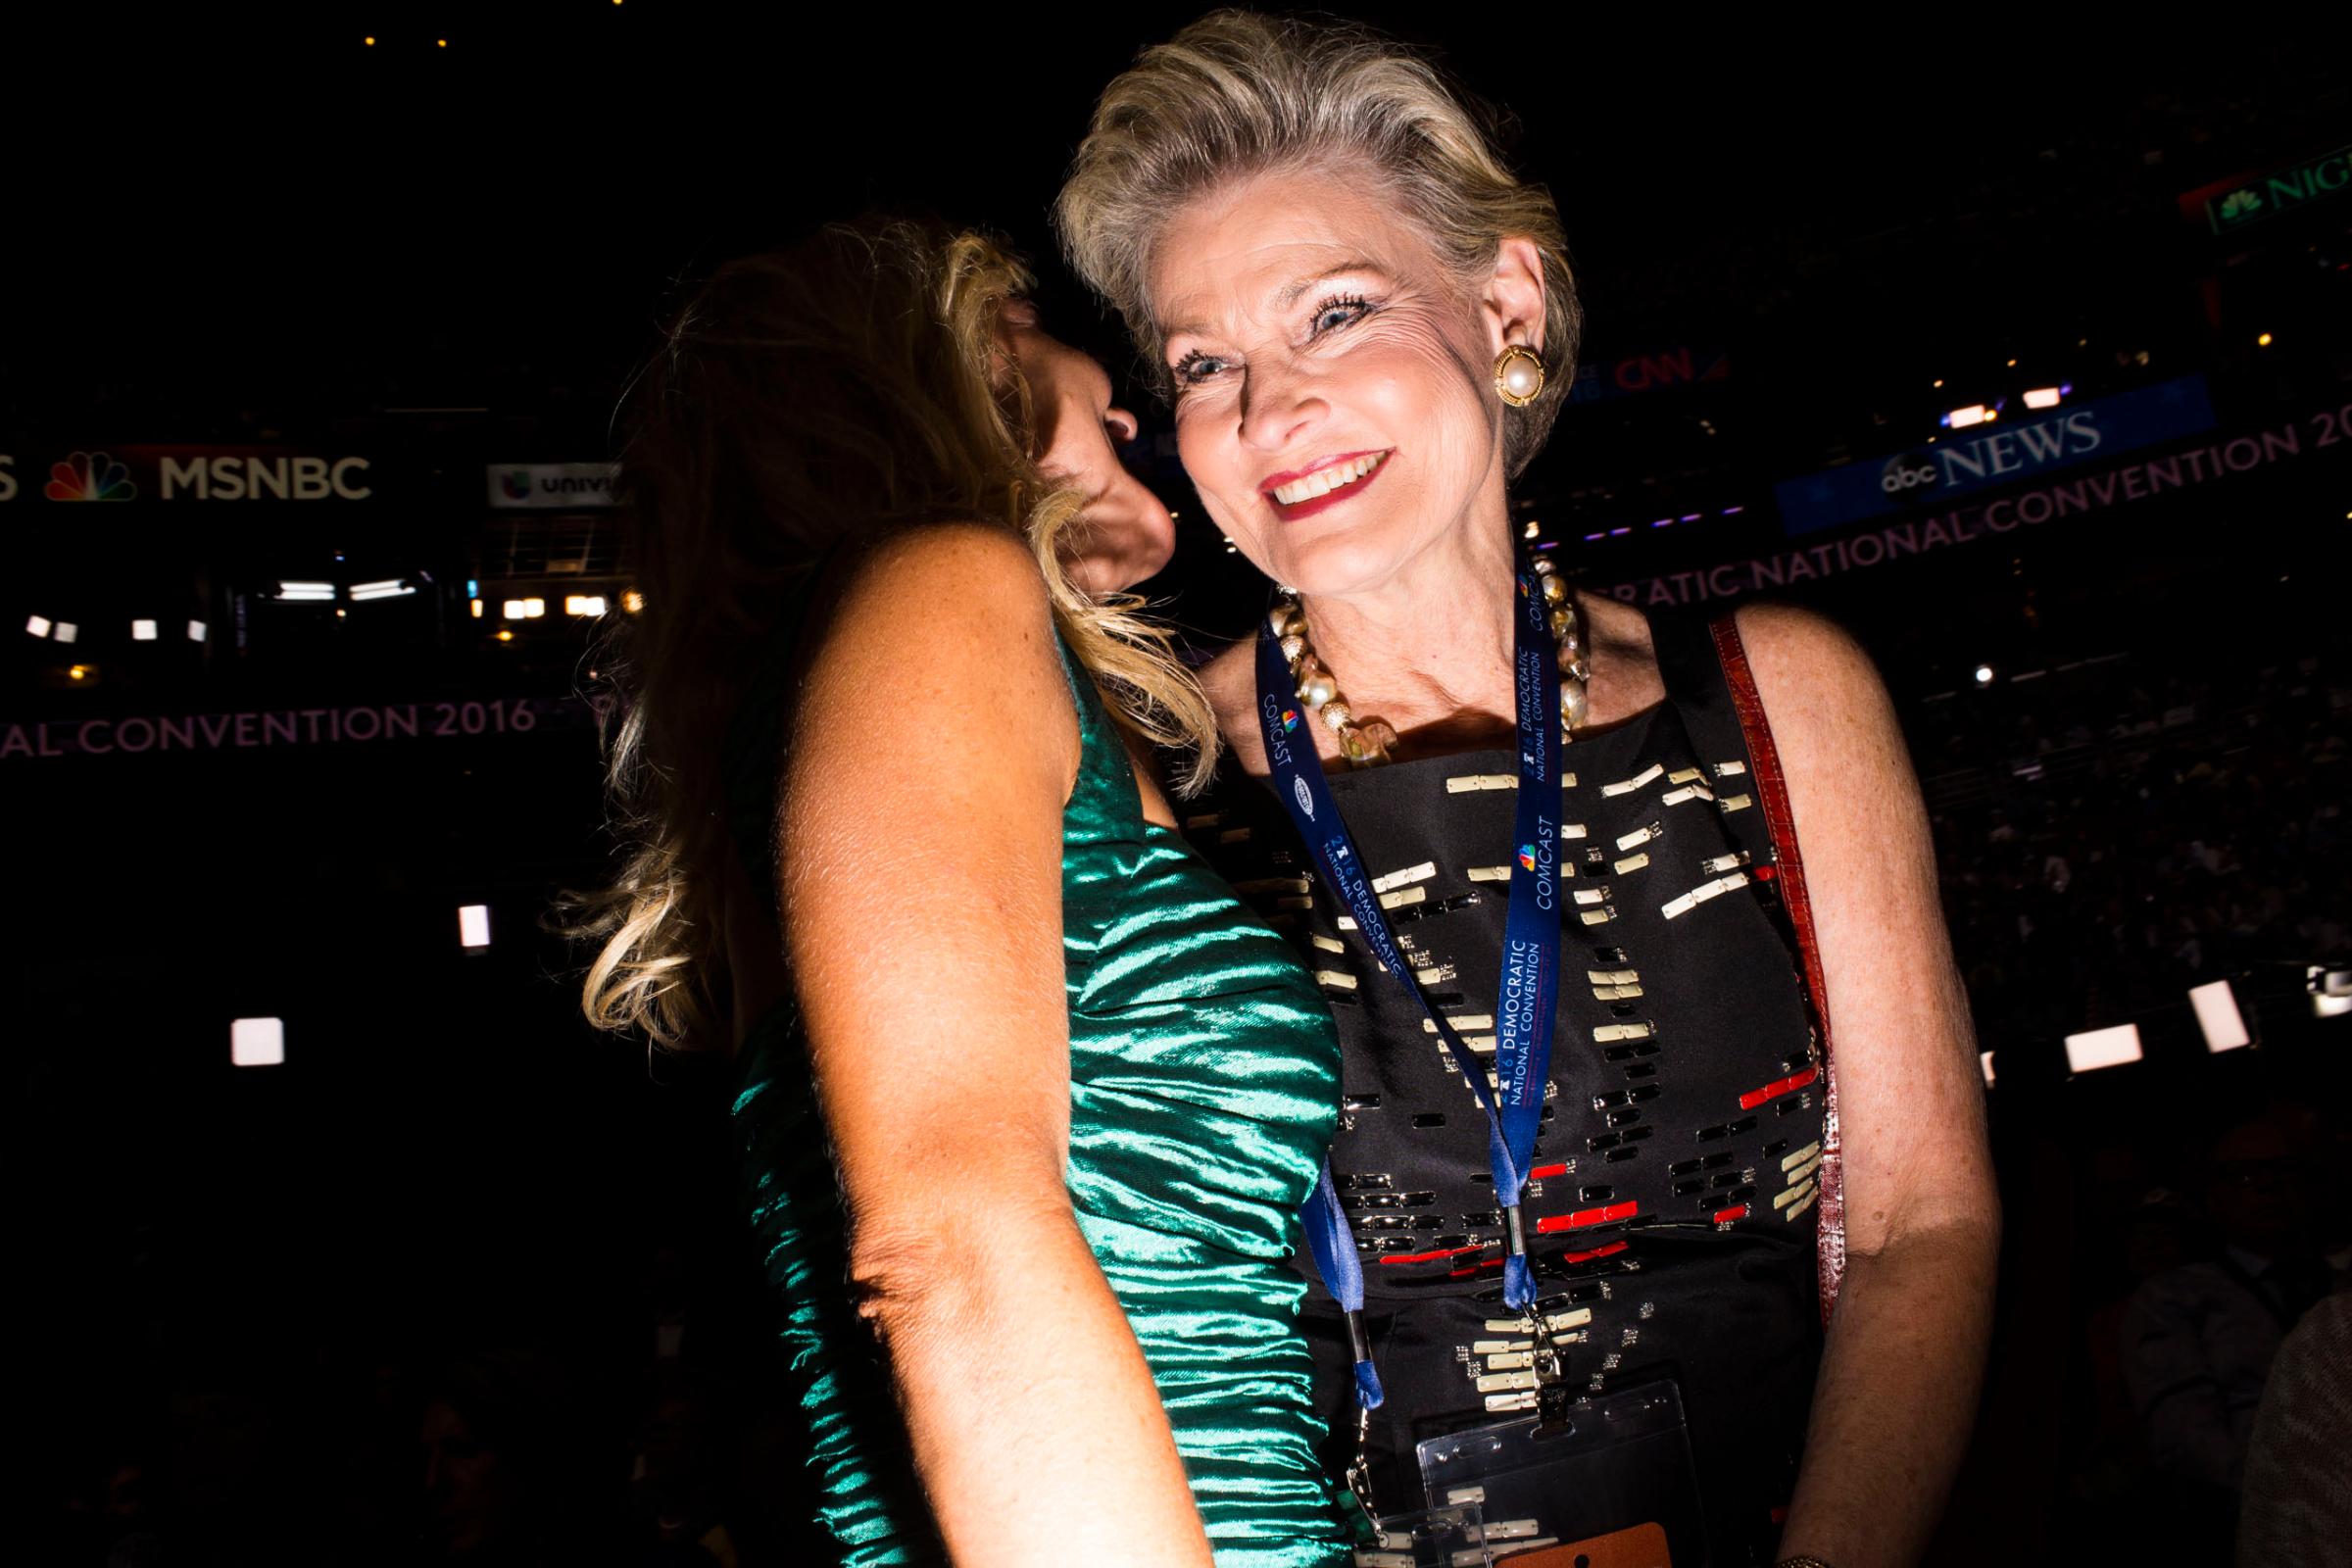 Nan Ellen Nelson, left, and her mother Grace Nelson, the wife of Florida Senator, Bill Nelson at the 2016 Democratic National Convention in Philadelphia on Monday, July 25, 2016.